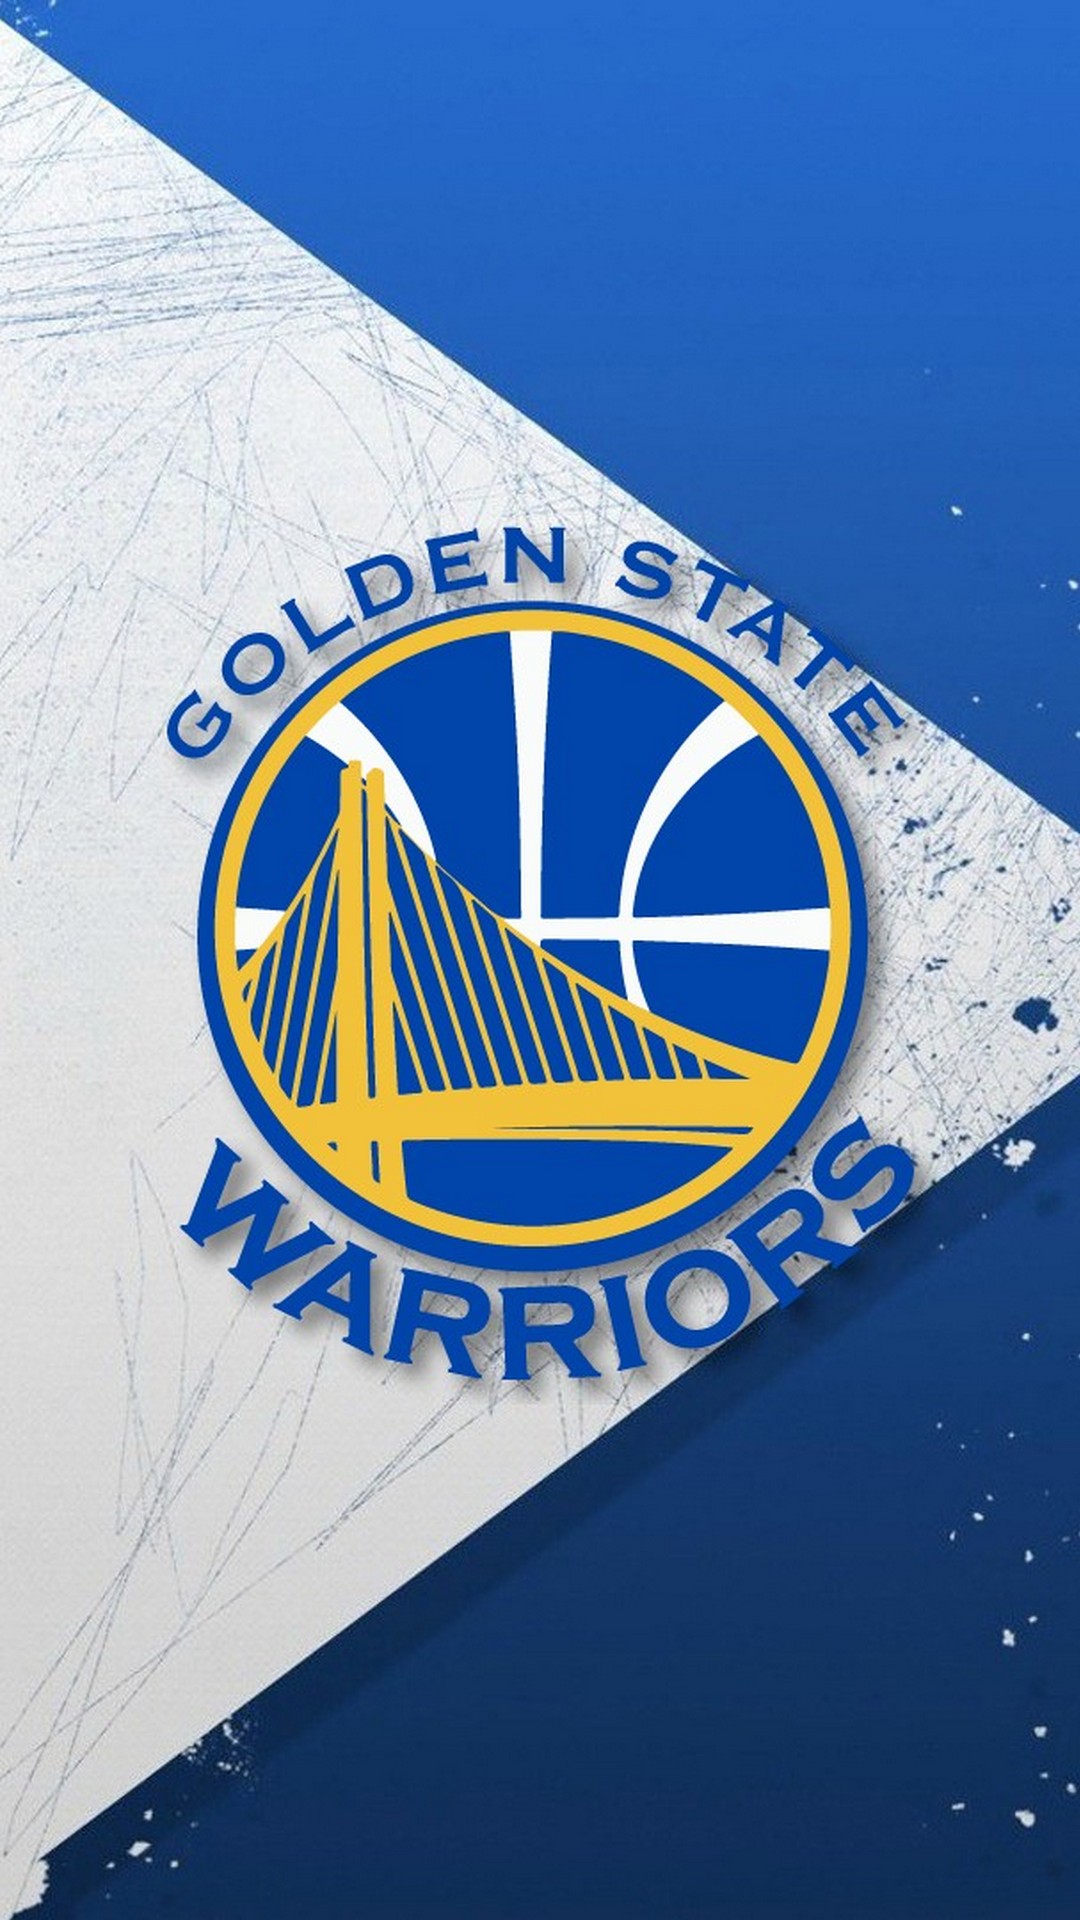 Wallpaper iPhone Golden State Warriors with image resolution 1080x1920 pixel. You can make this wallpaper for your iPhone 5, 6, 7, 8, X backgrounds, Mobile Screensaver, or iPad Lock Screen